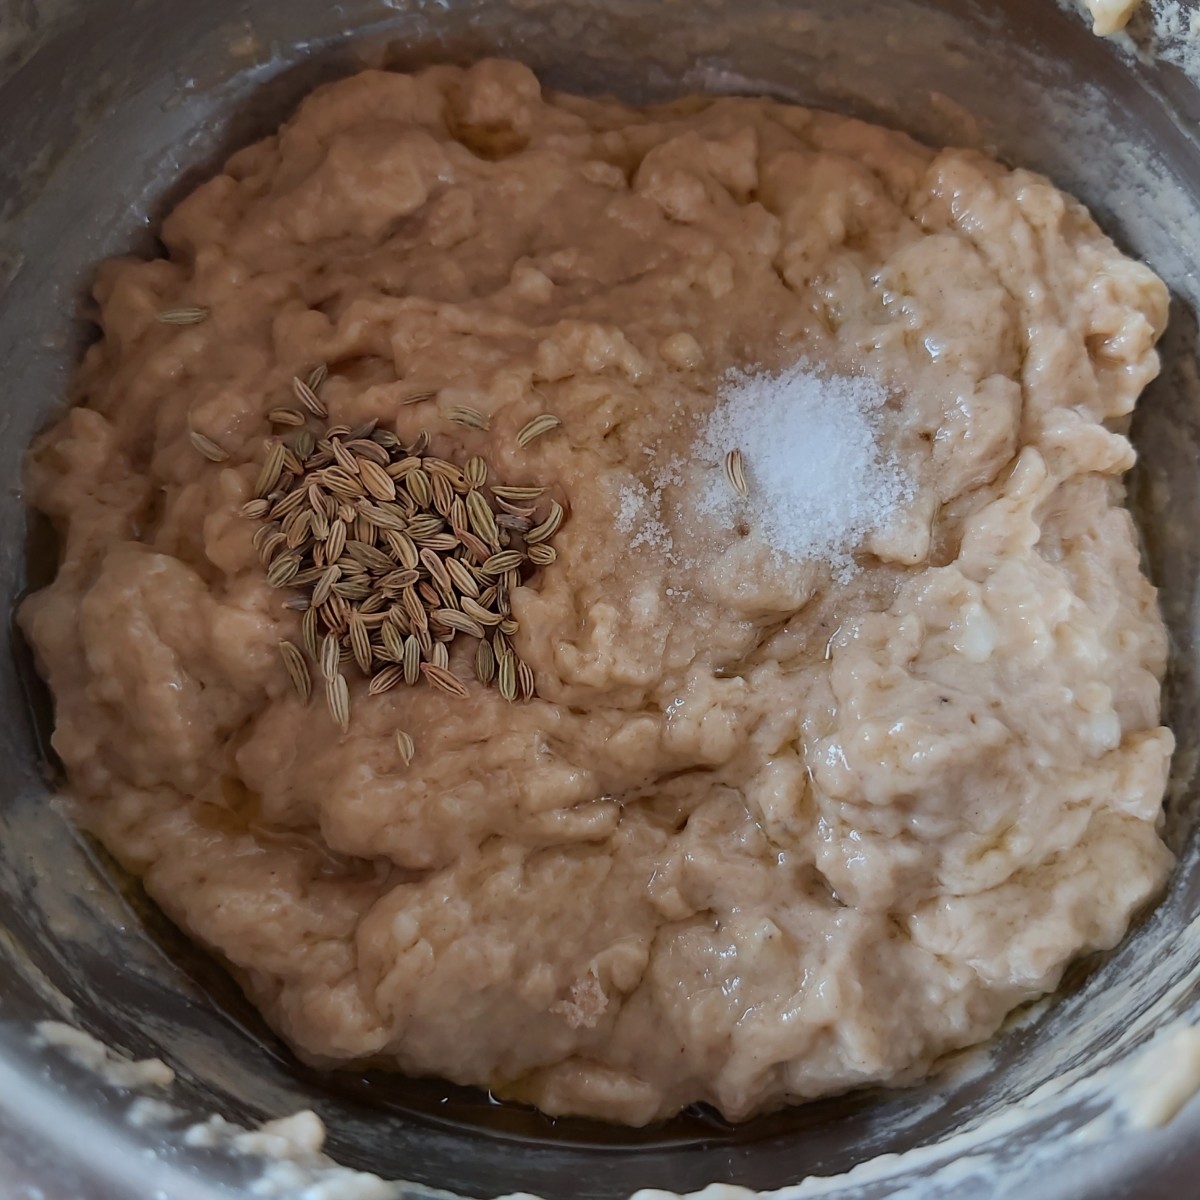 Add 1 tablespoon of fennel seeds and 1/2 teaspoon of salt to the batter (you can also add cardamom powder and ginger powder for the extra flavor).